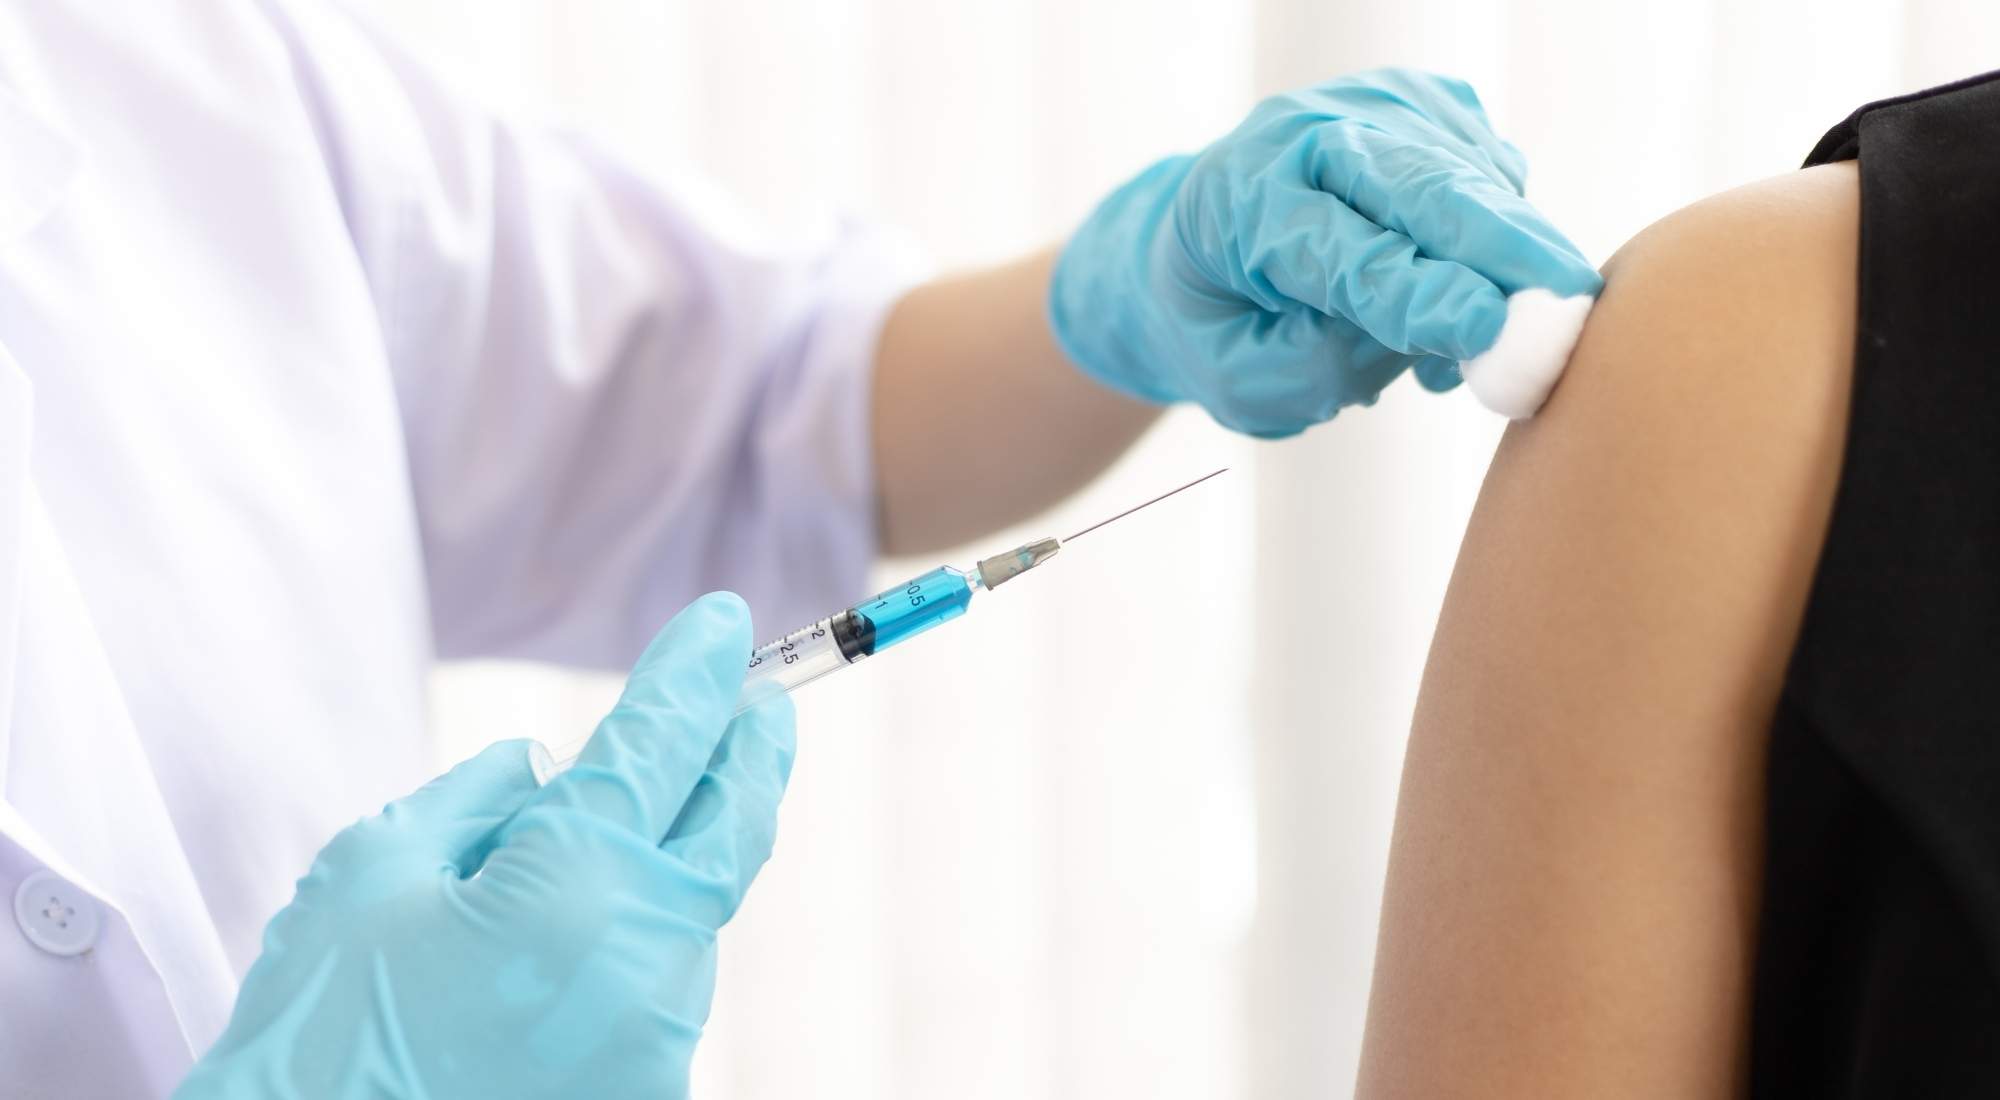 Travel Vaccination Nurse Jobs Are They Worth It? TNS